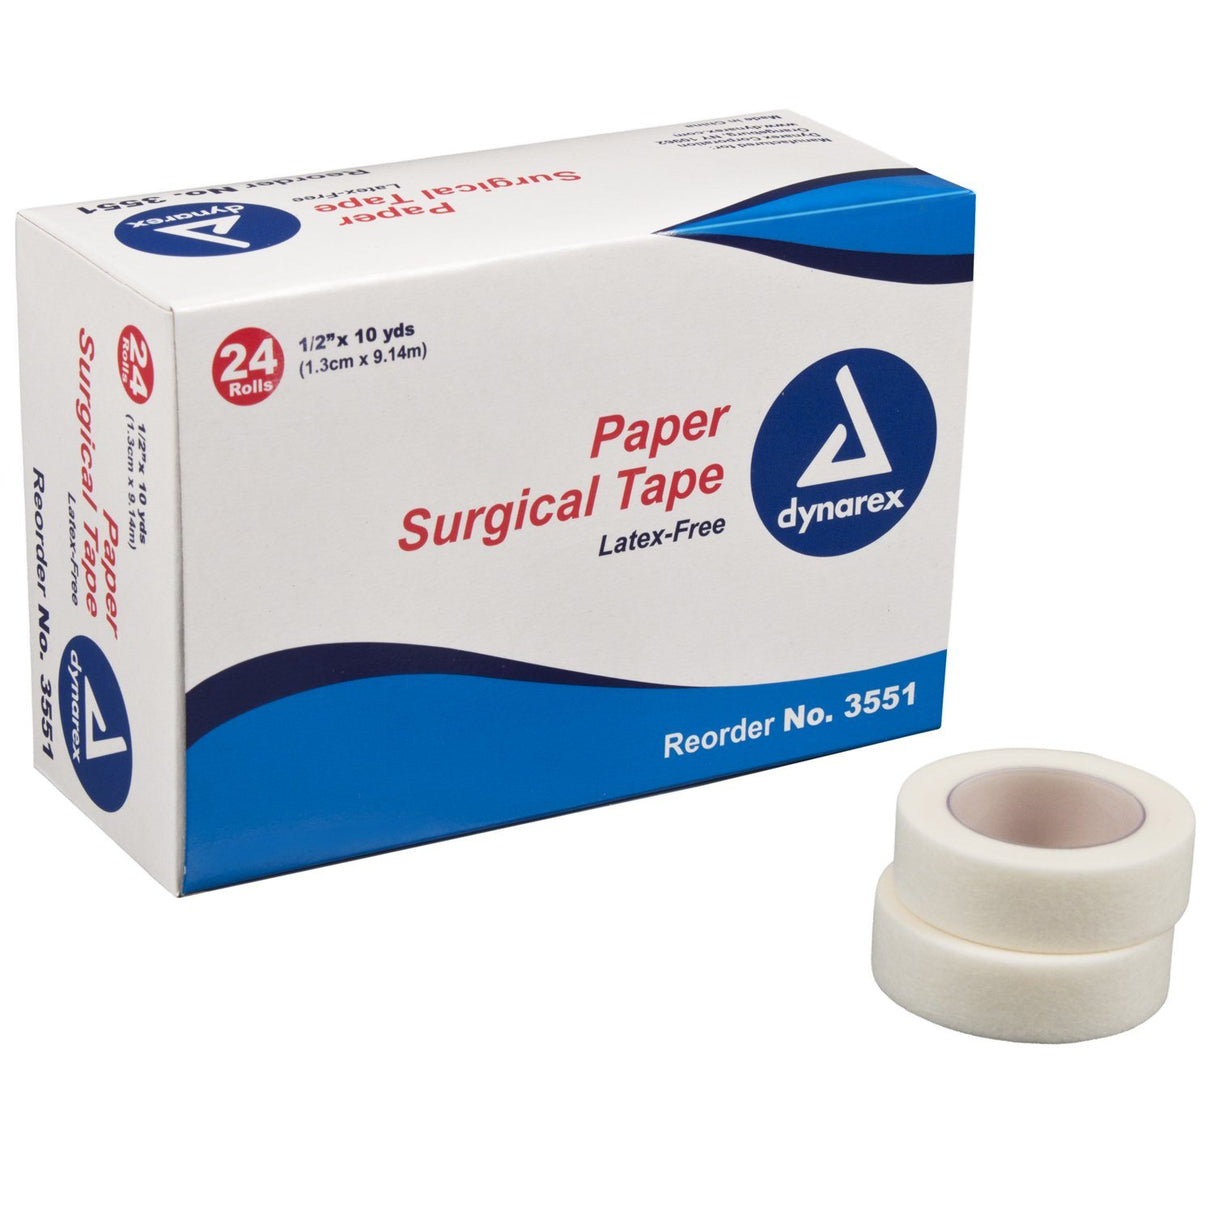 Image of Dynarex Surgical Paper Tape - 1/2" x 10 yds